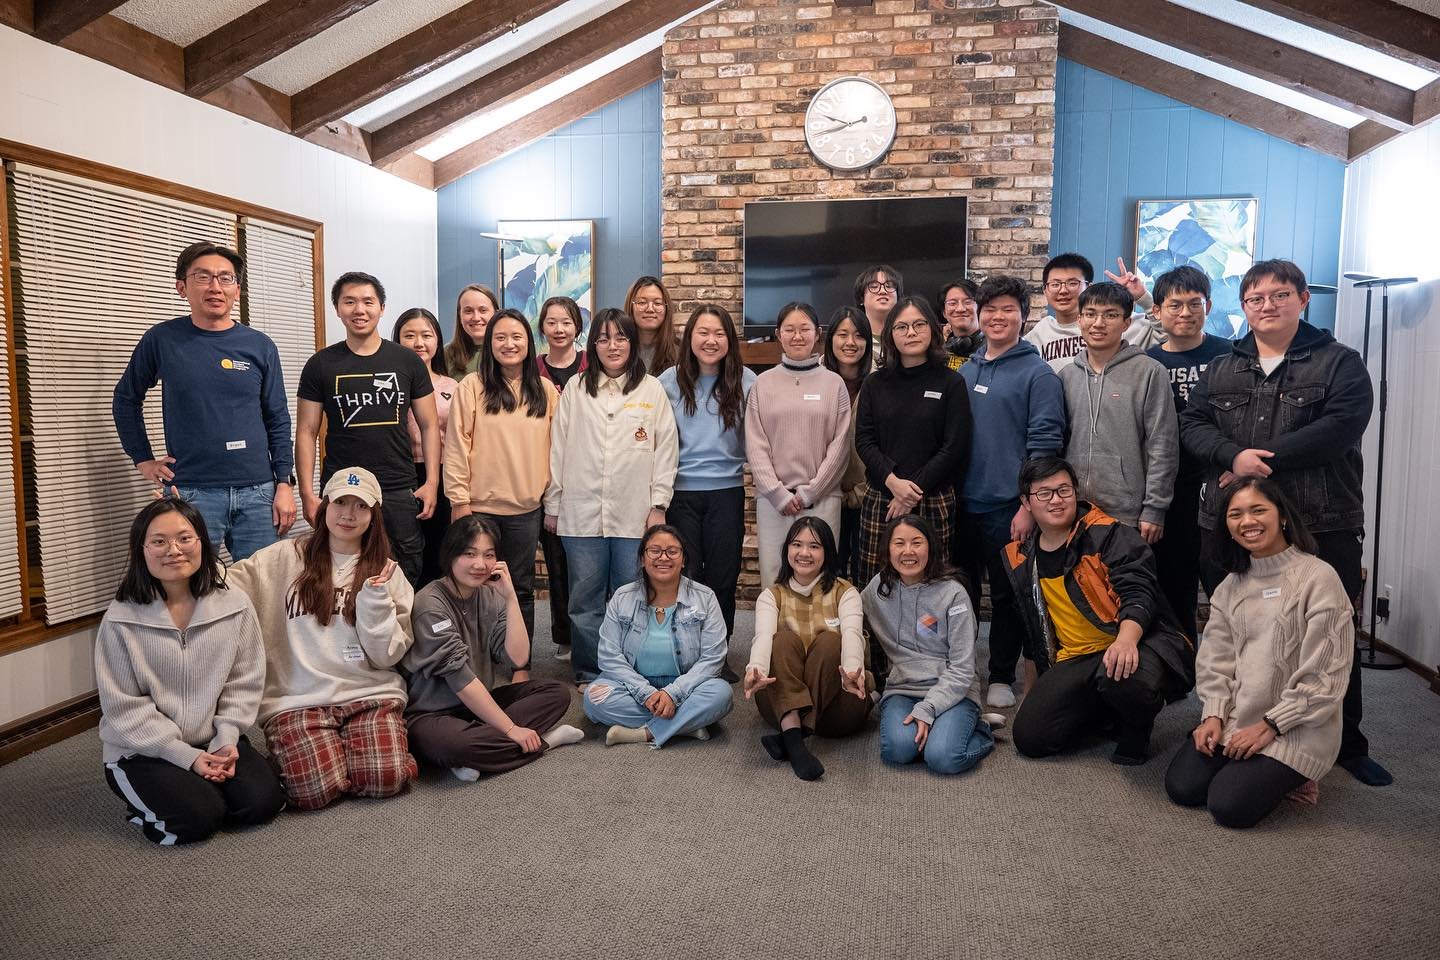 🎞2023.4.19/20 Grad/Undergrad Dinners🍲
This past weekend we had dinners together with our grad/undergrad friends and played group games afterwards😎
Tomorrow we won&rsquo;t have a bible study but some of our 2024 graduates will make dinner for us as